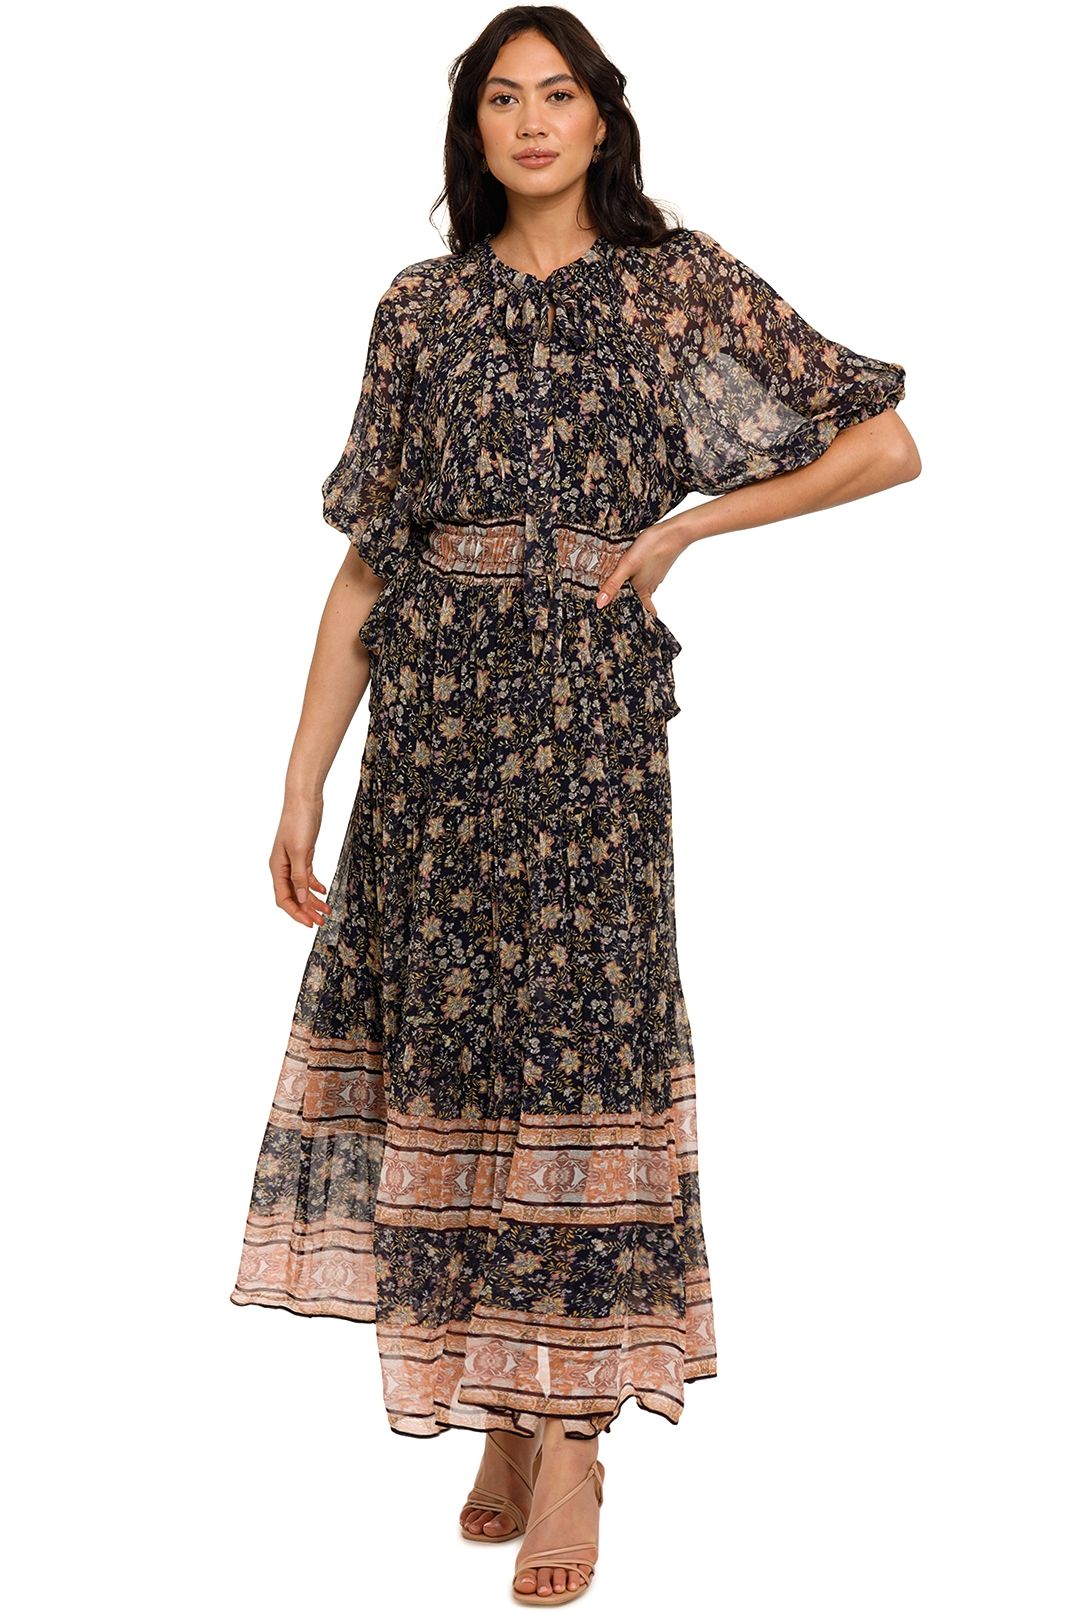 Ministry Of Style Navajo Maxi Dress floral